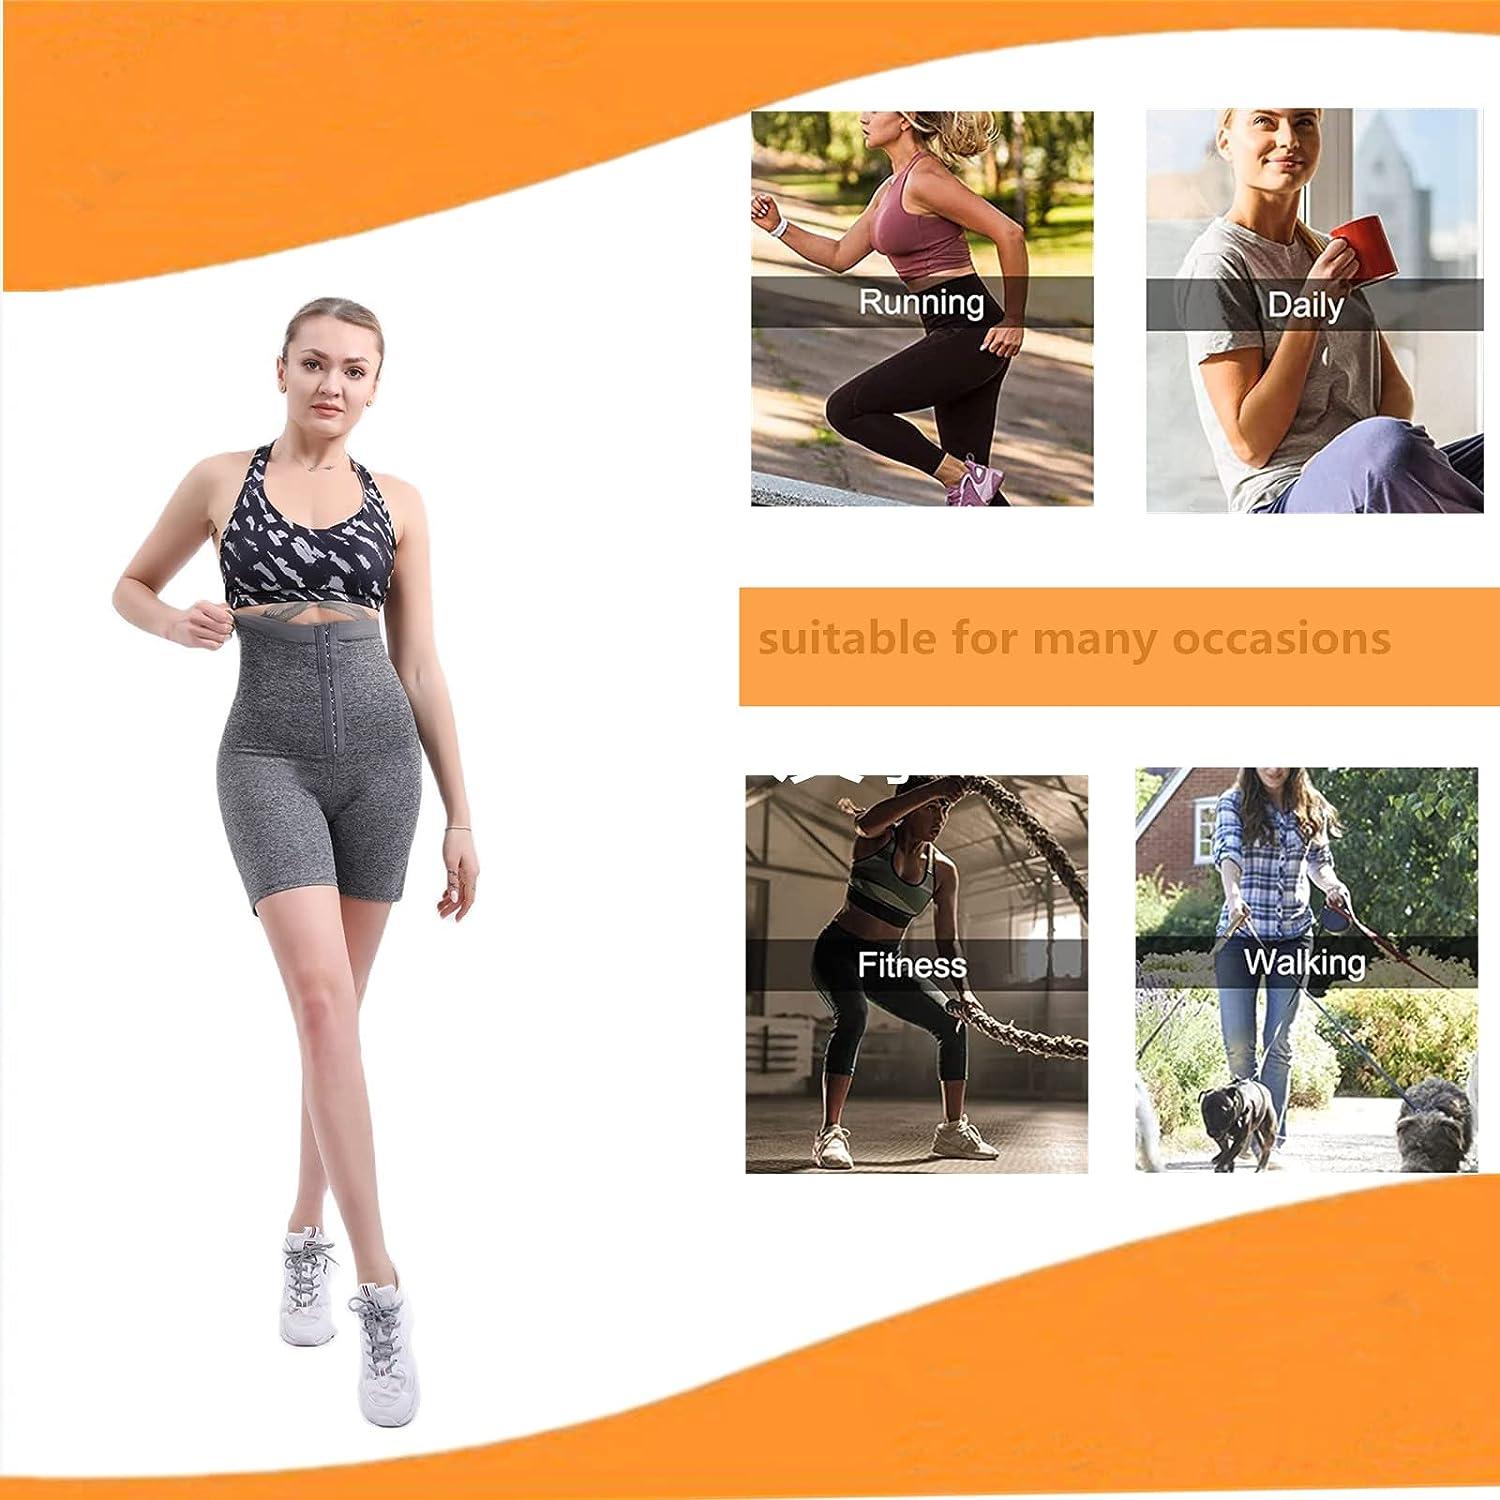 Body Shaper Sauna Slimming Pants Hot Thermo High Waist Fat Burning Sweat  Capris Workout Shapers for Weight Loss Grey1 L/XL